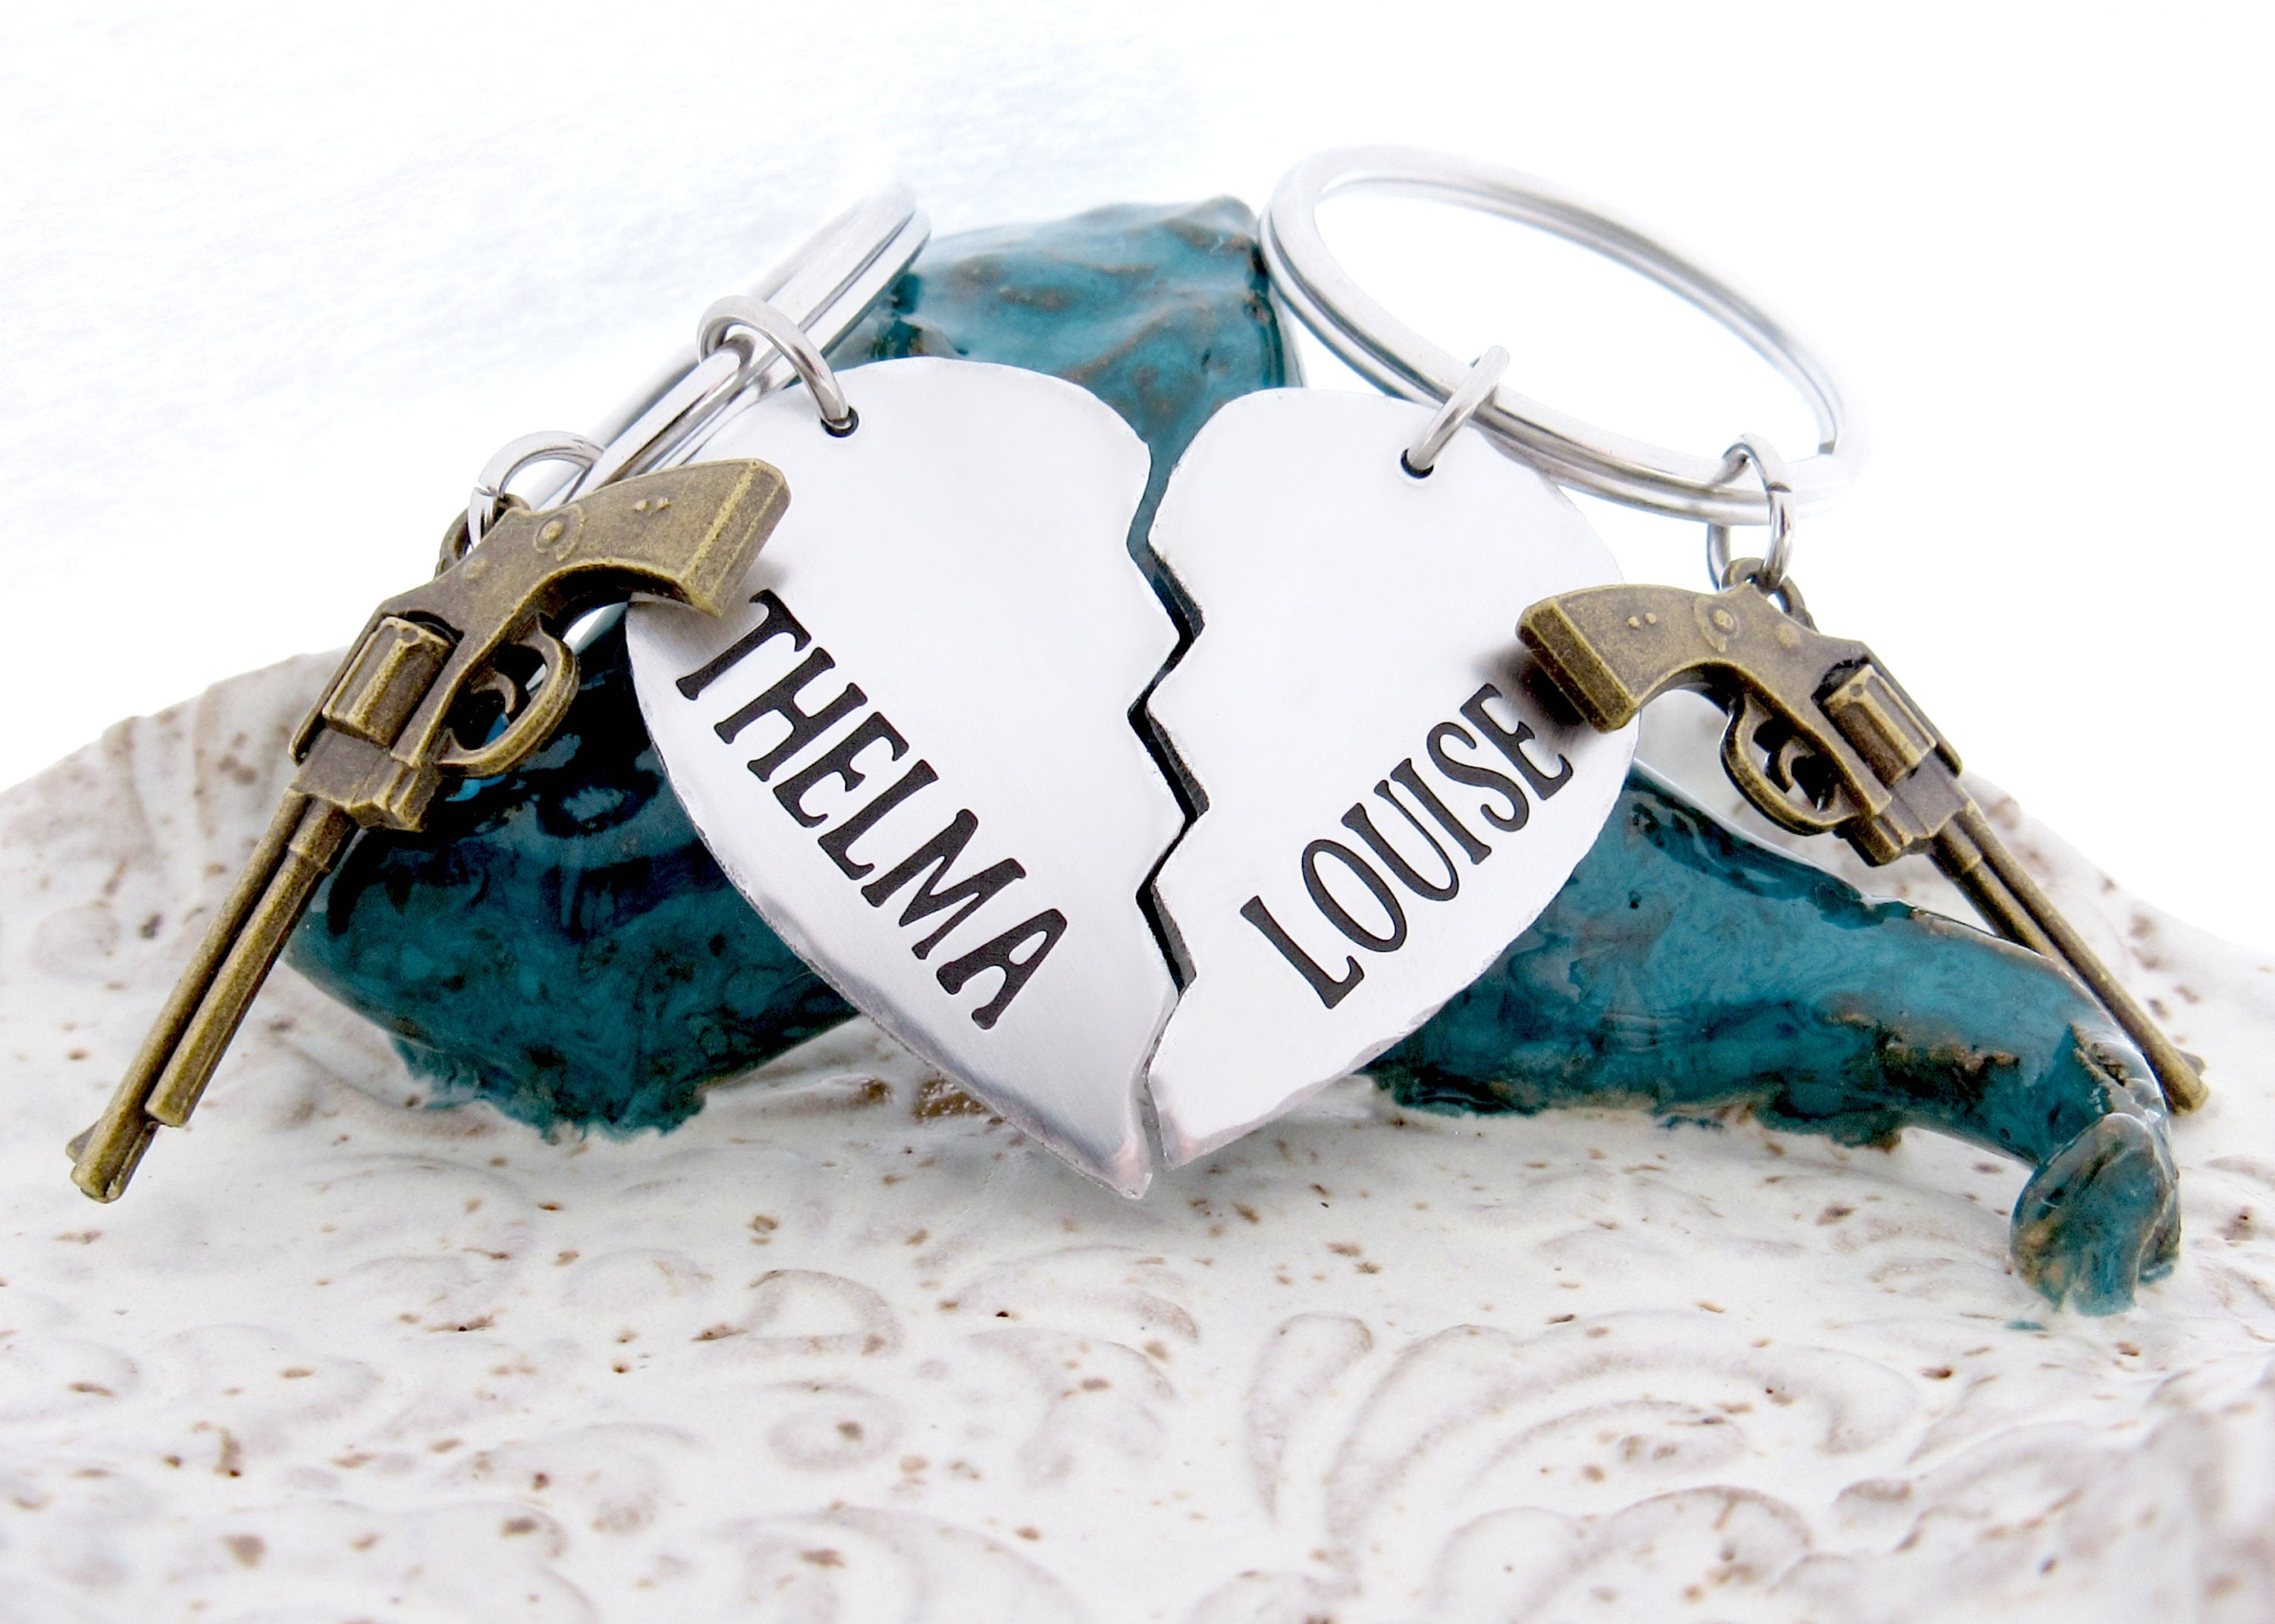 MYOSPARK Thelma and Louise Keychain Set Best Friends Keychains Moving Away  Gift Friendship Jewelry